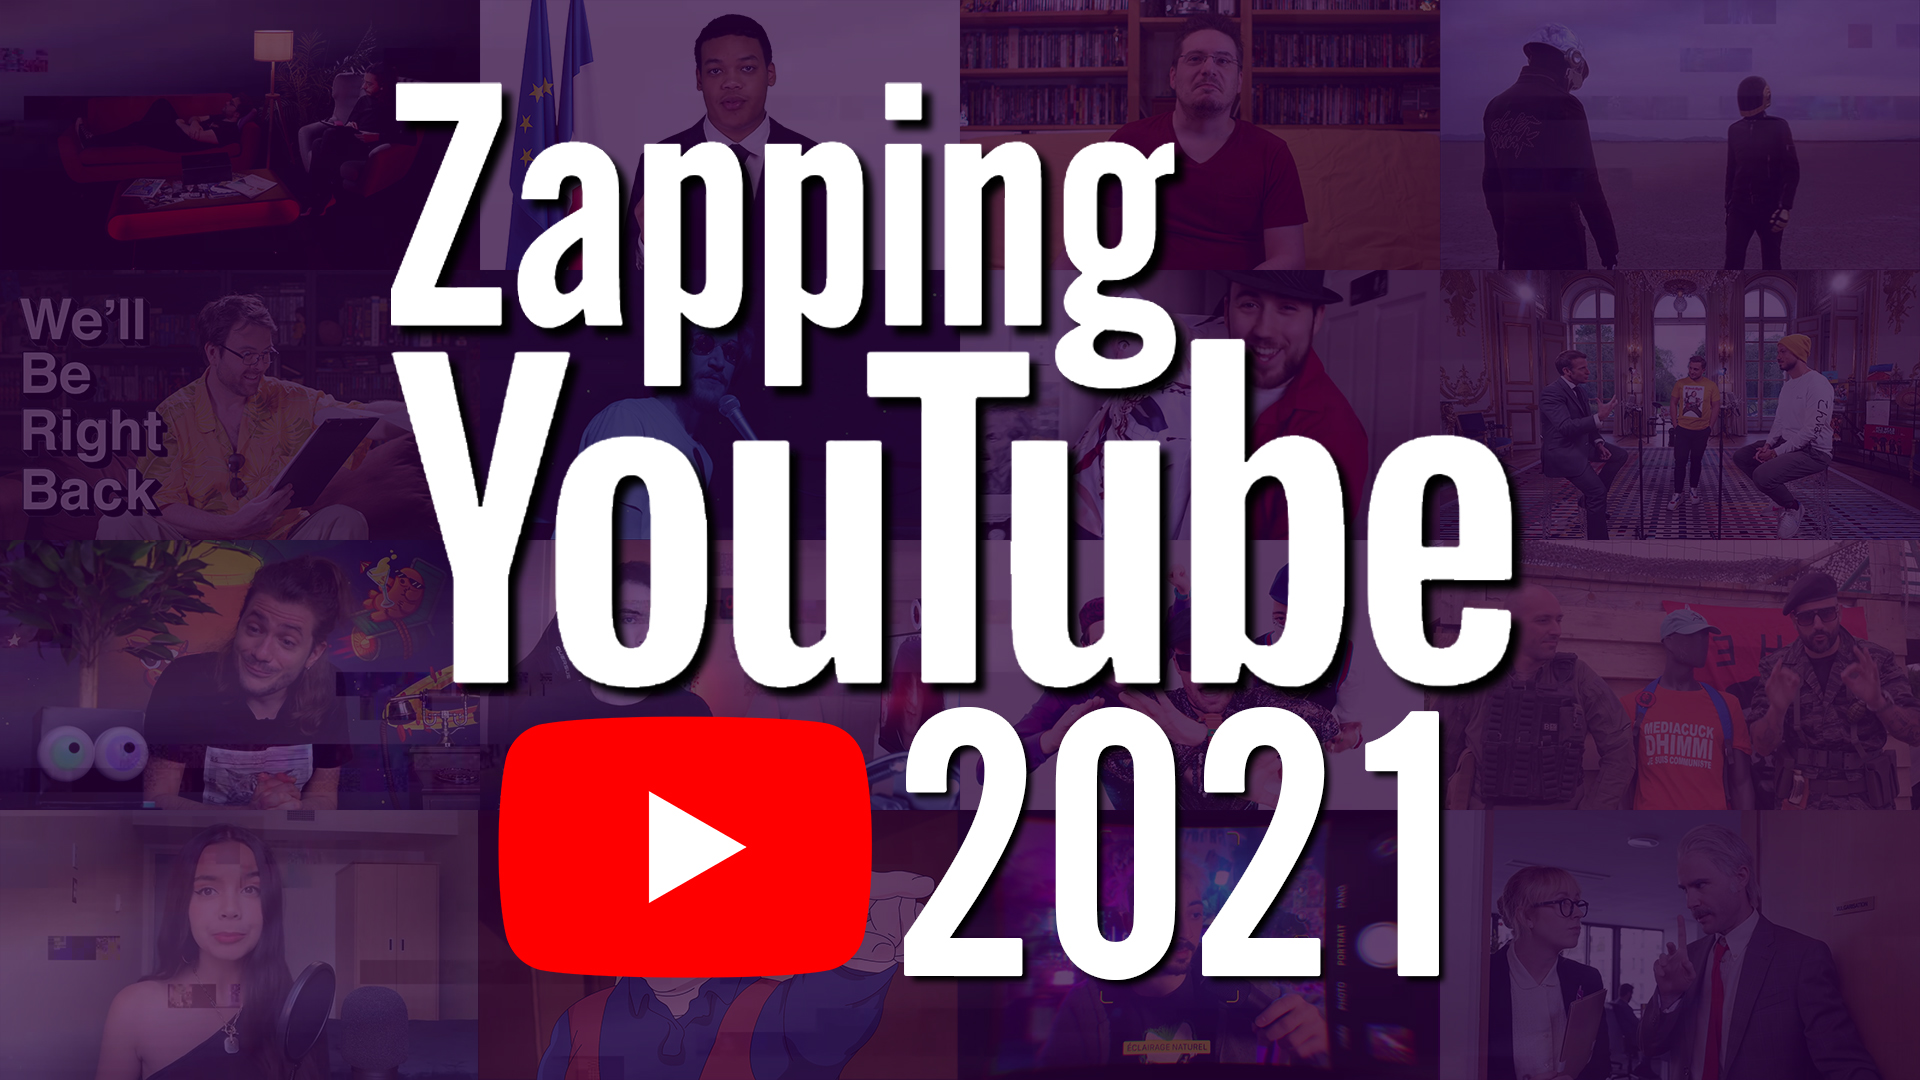 Zapping YouTube 2021